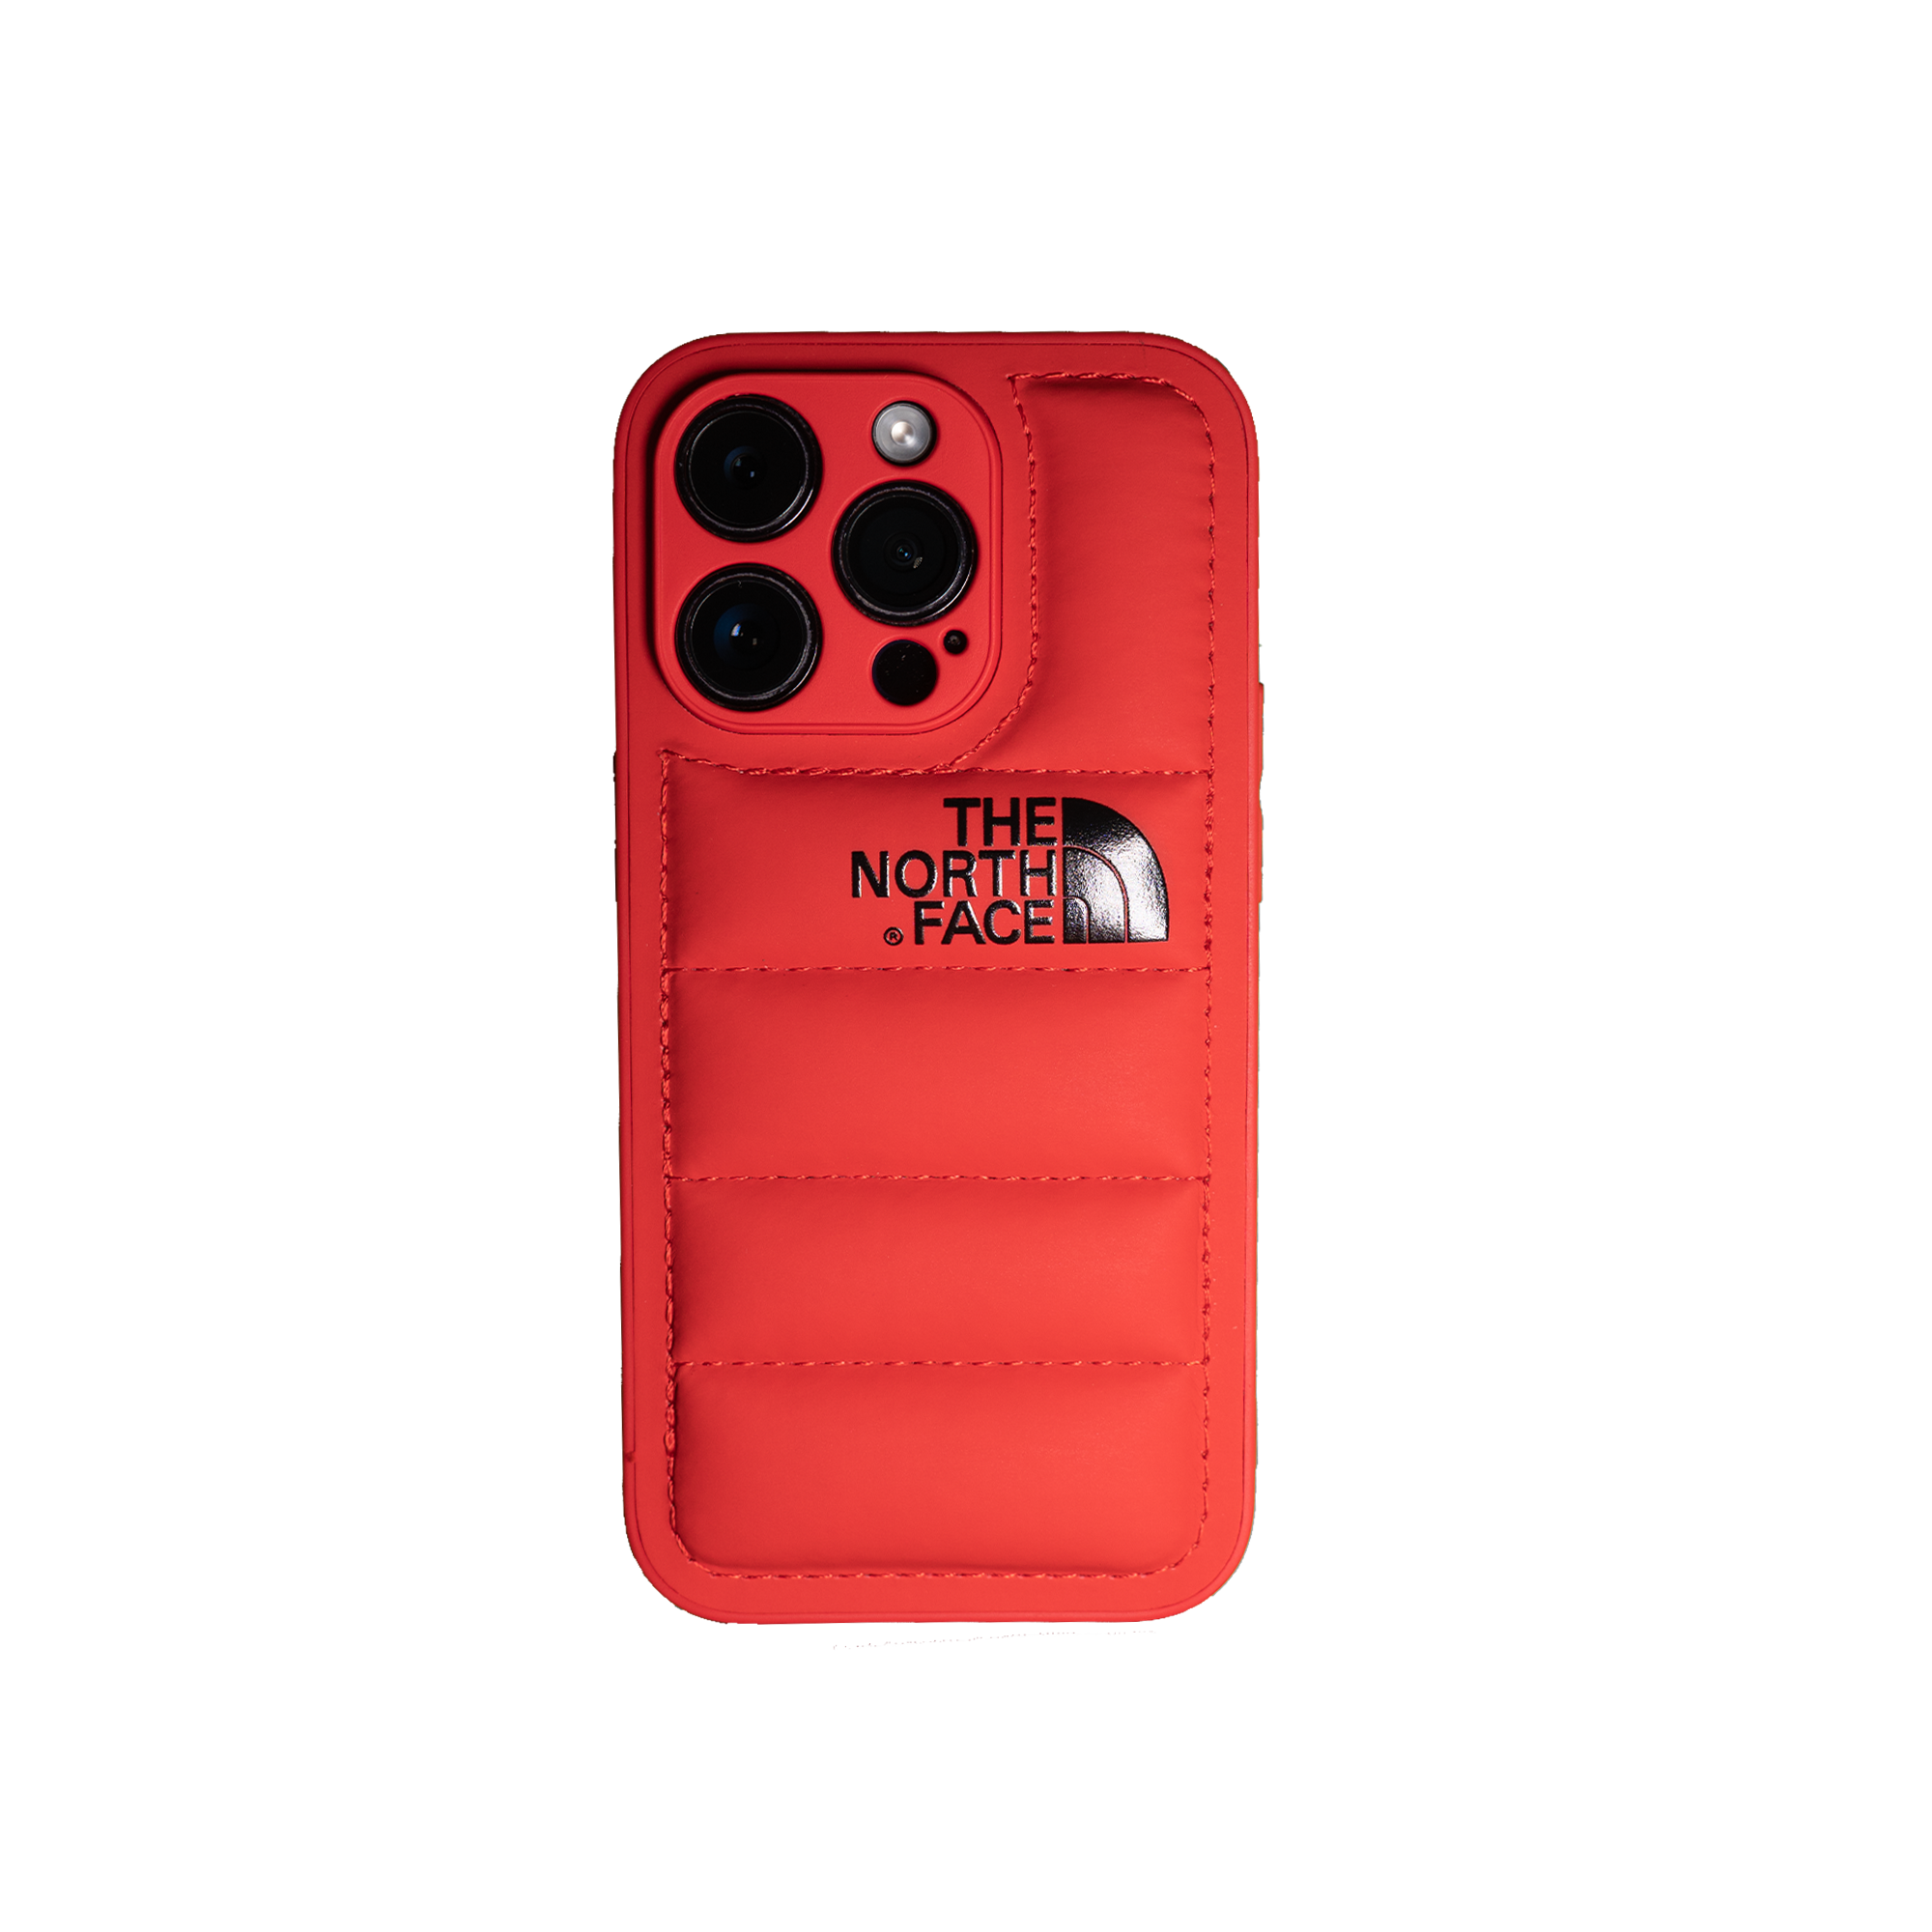 Striking red The North Face smartphone case, designed for the bold and active lifestyle.